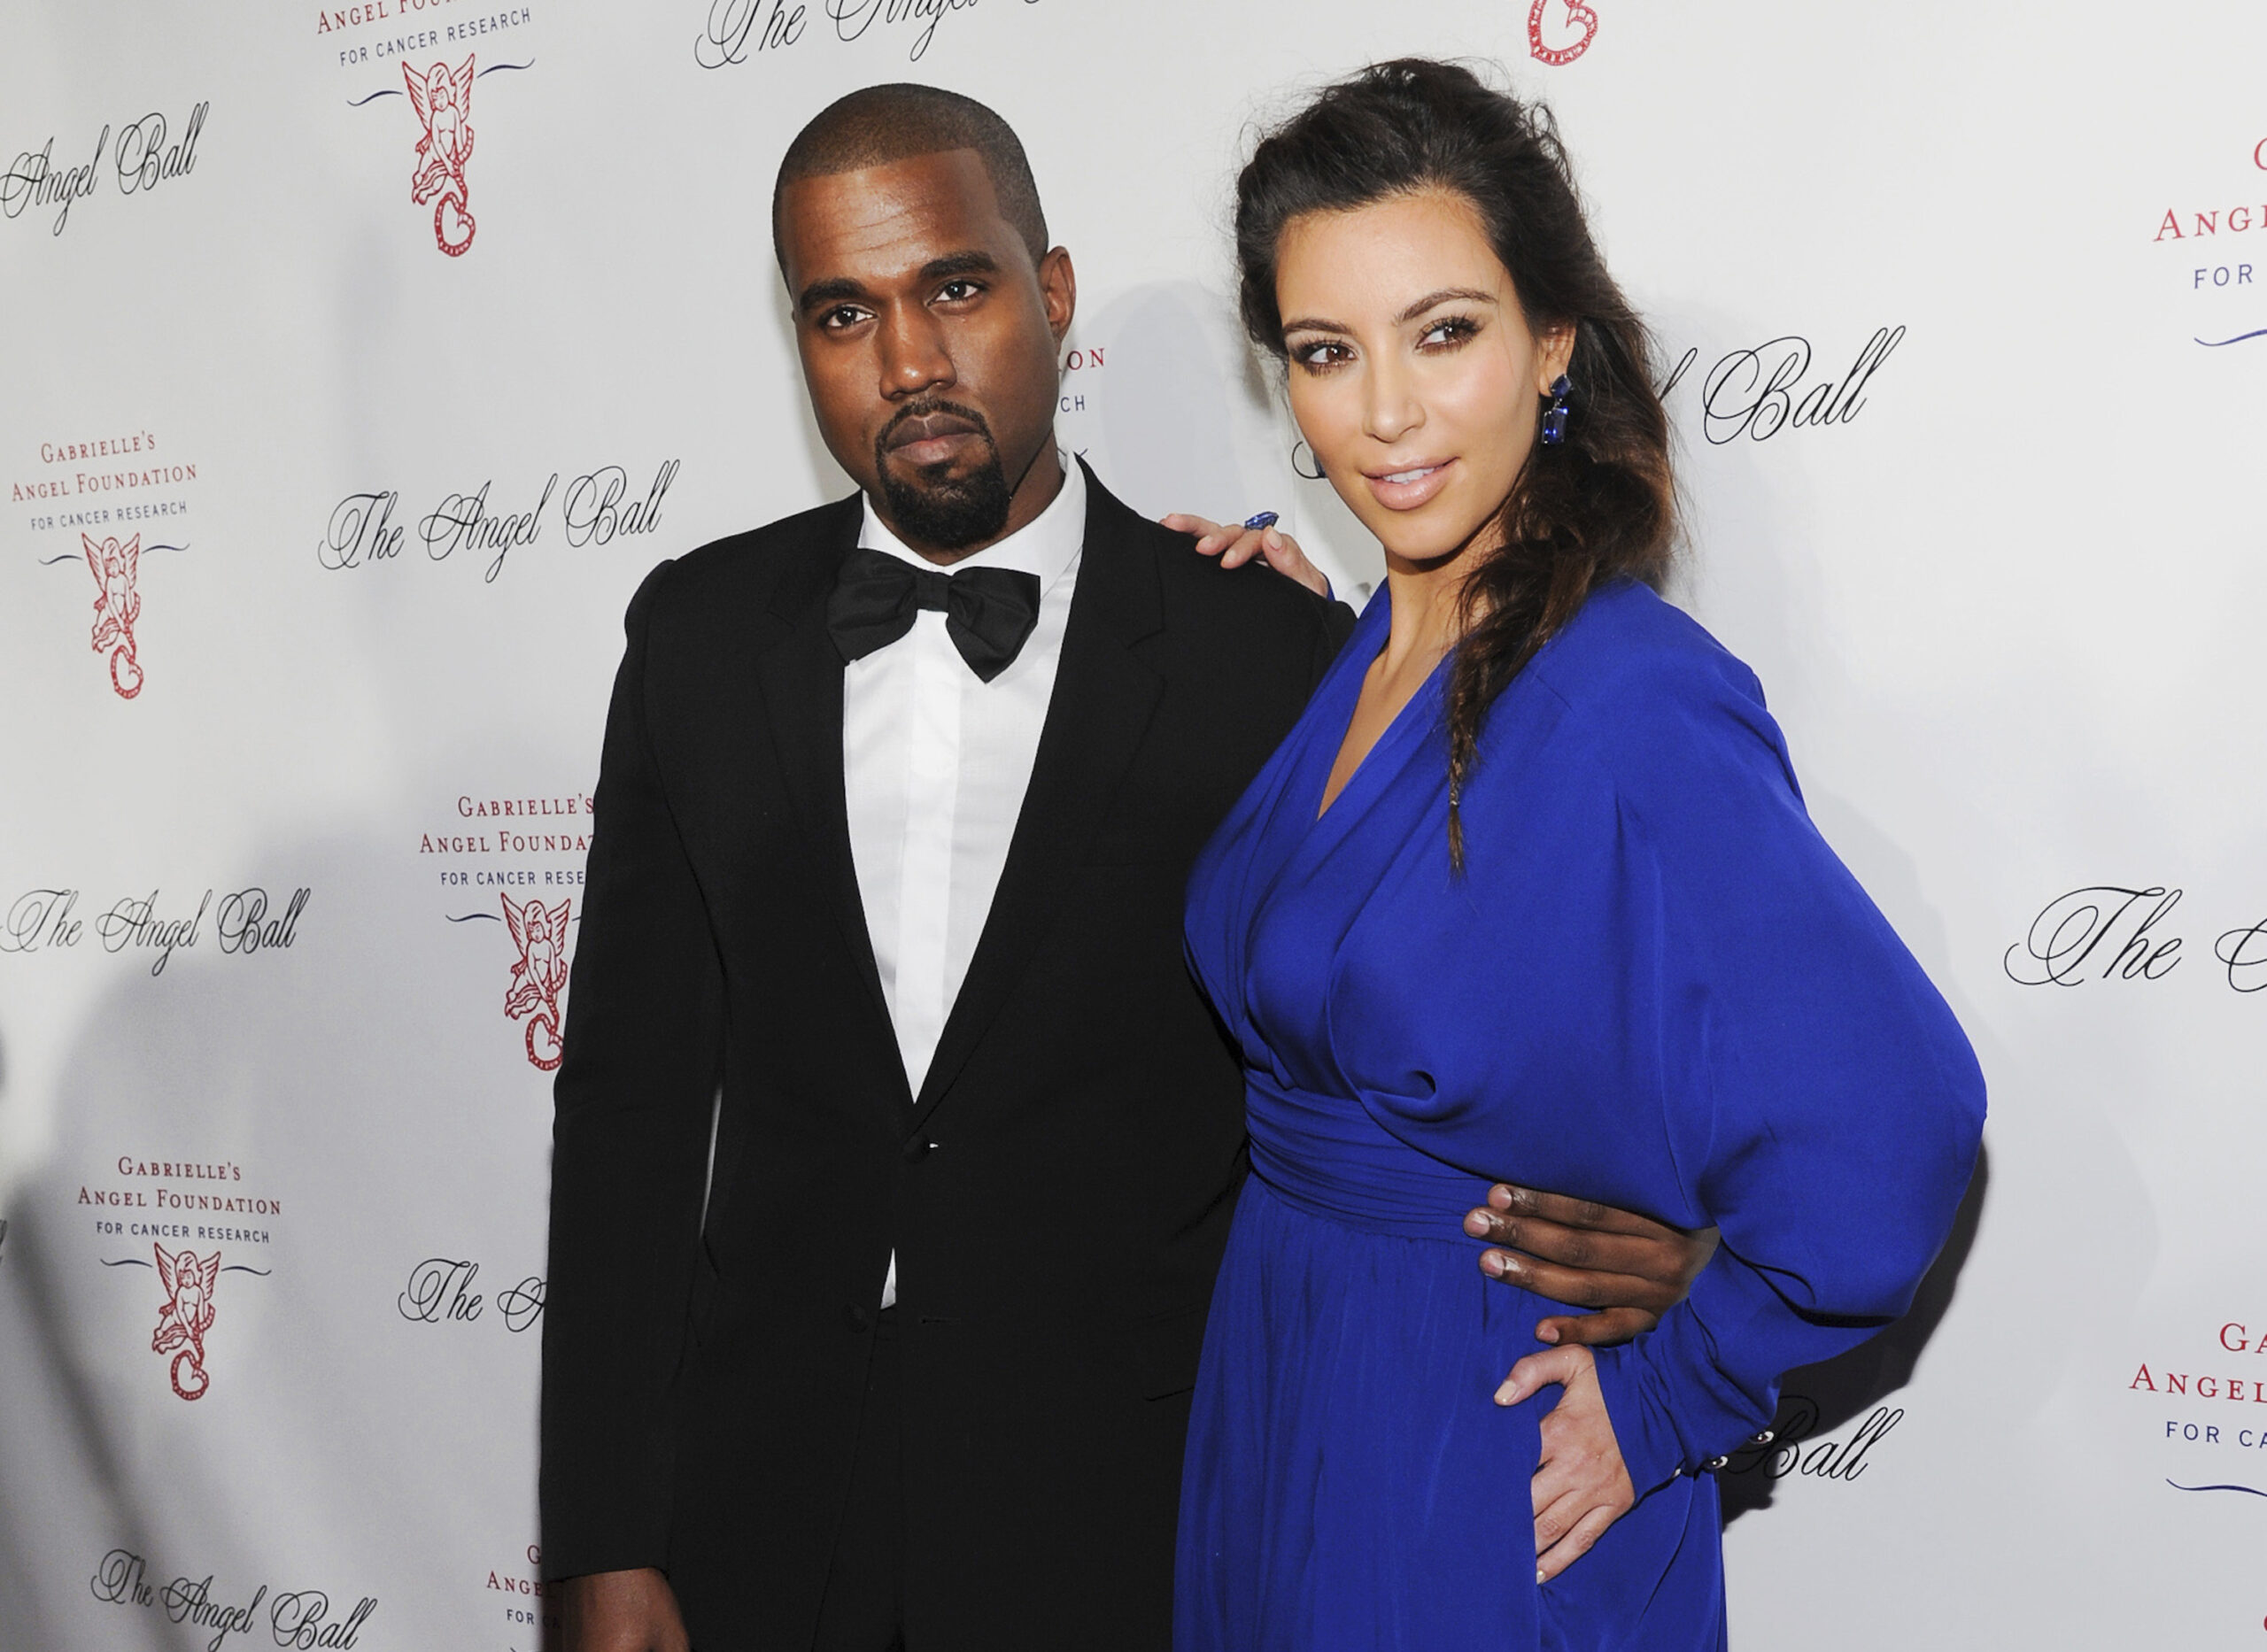 FILE - Kanye West, left, and Kim Kardashian attend Gabrielle's Angel Foundation Angel Ball cancer research benefit on Oct. 22, 2012, in New York. Kim Kardashian West filed for divorce Friday, Feb. 19, 2021, from Kanye West after 6 1/2 years of marriage. Sources familiar with the filing but not authorized to speak publicly confirmed that Kardashian filed for divorce in Los Angeles Superior Court. The filing was not immediately available. (Photo by Evan Agostini/Invision/AP, File